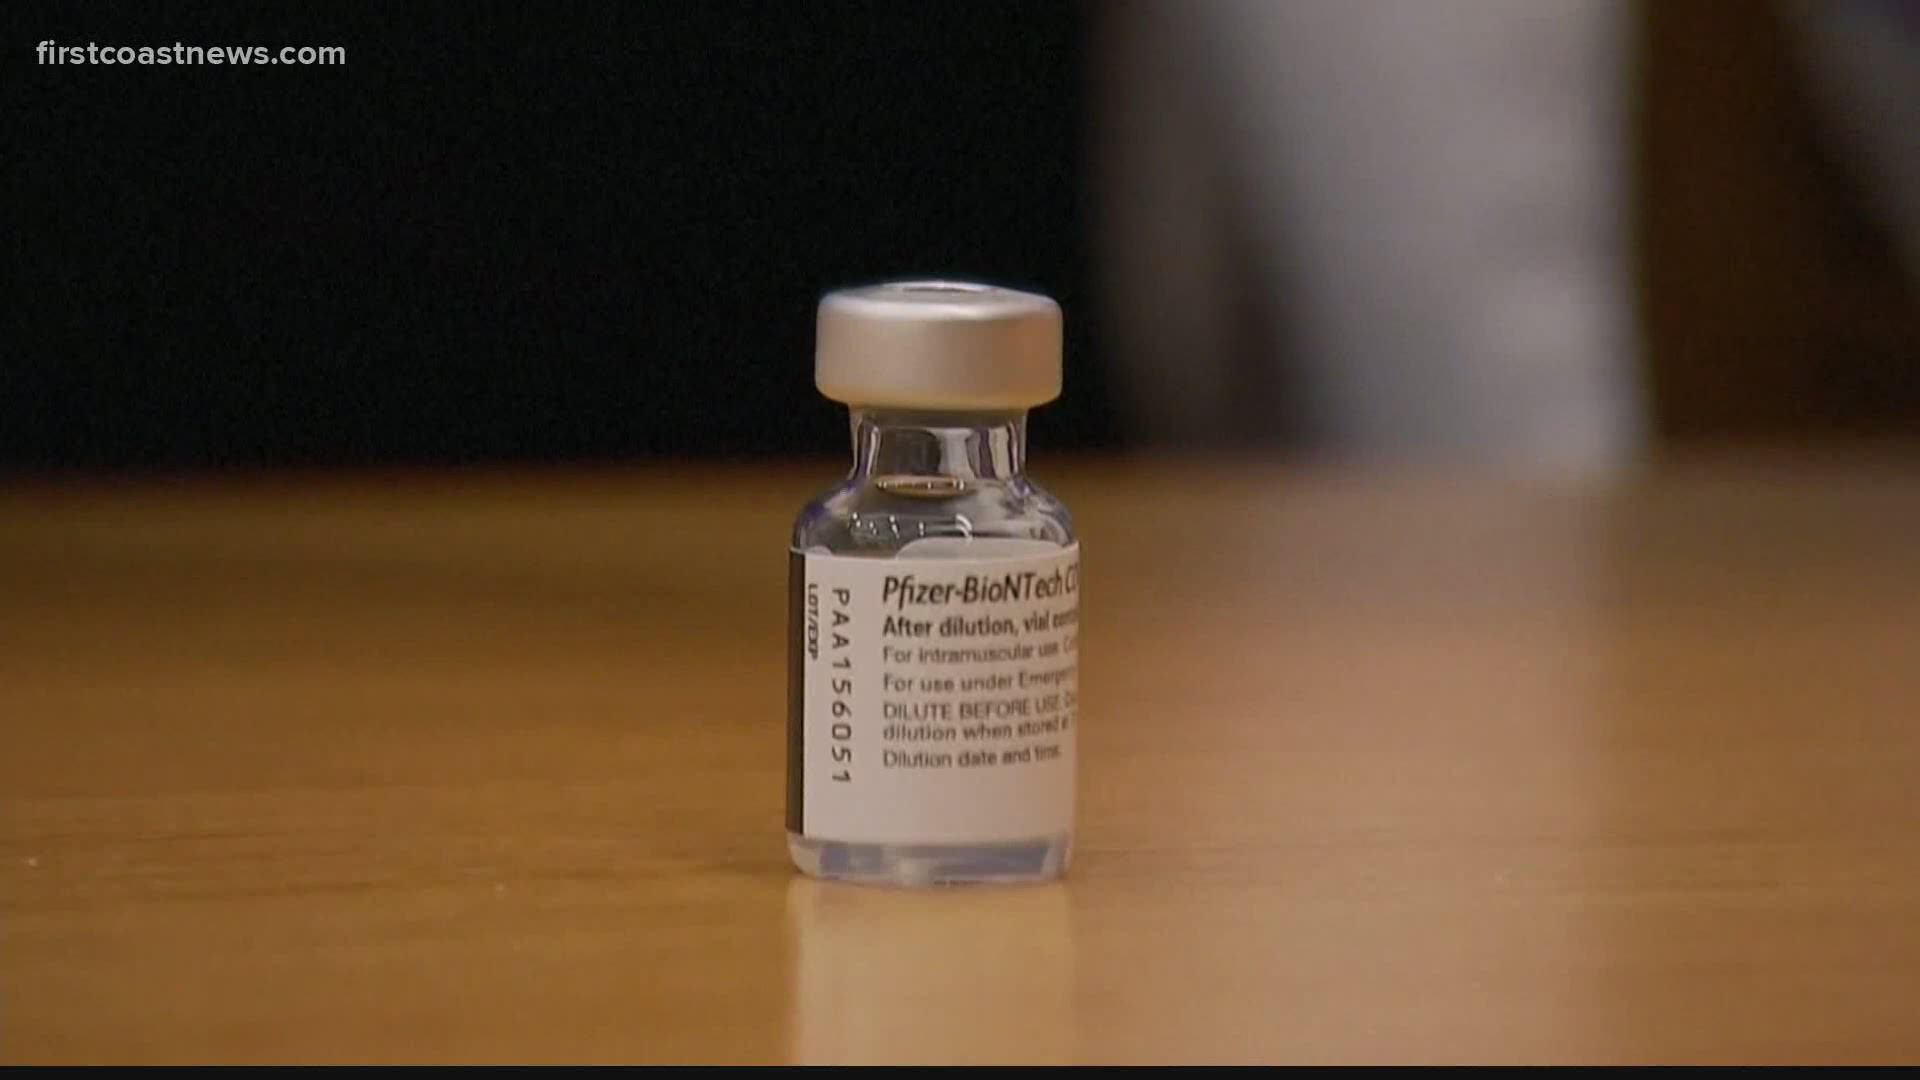 More than half a Floridians are vaccinated against COVID-19, according to Mayo Clinic’s vaccine tracker.